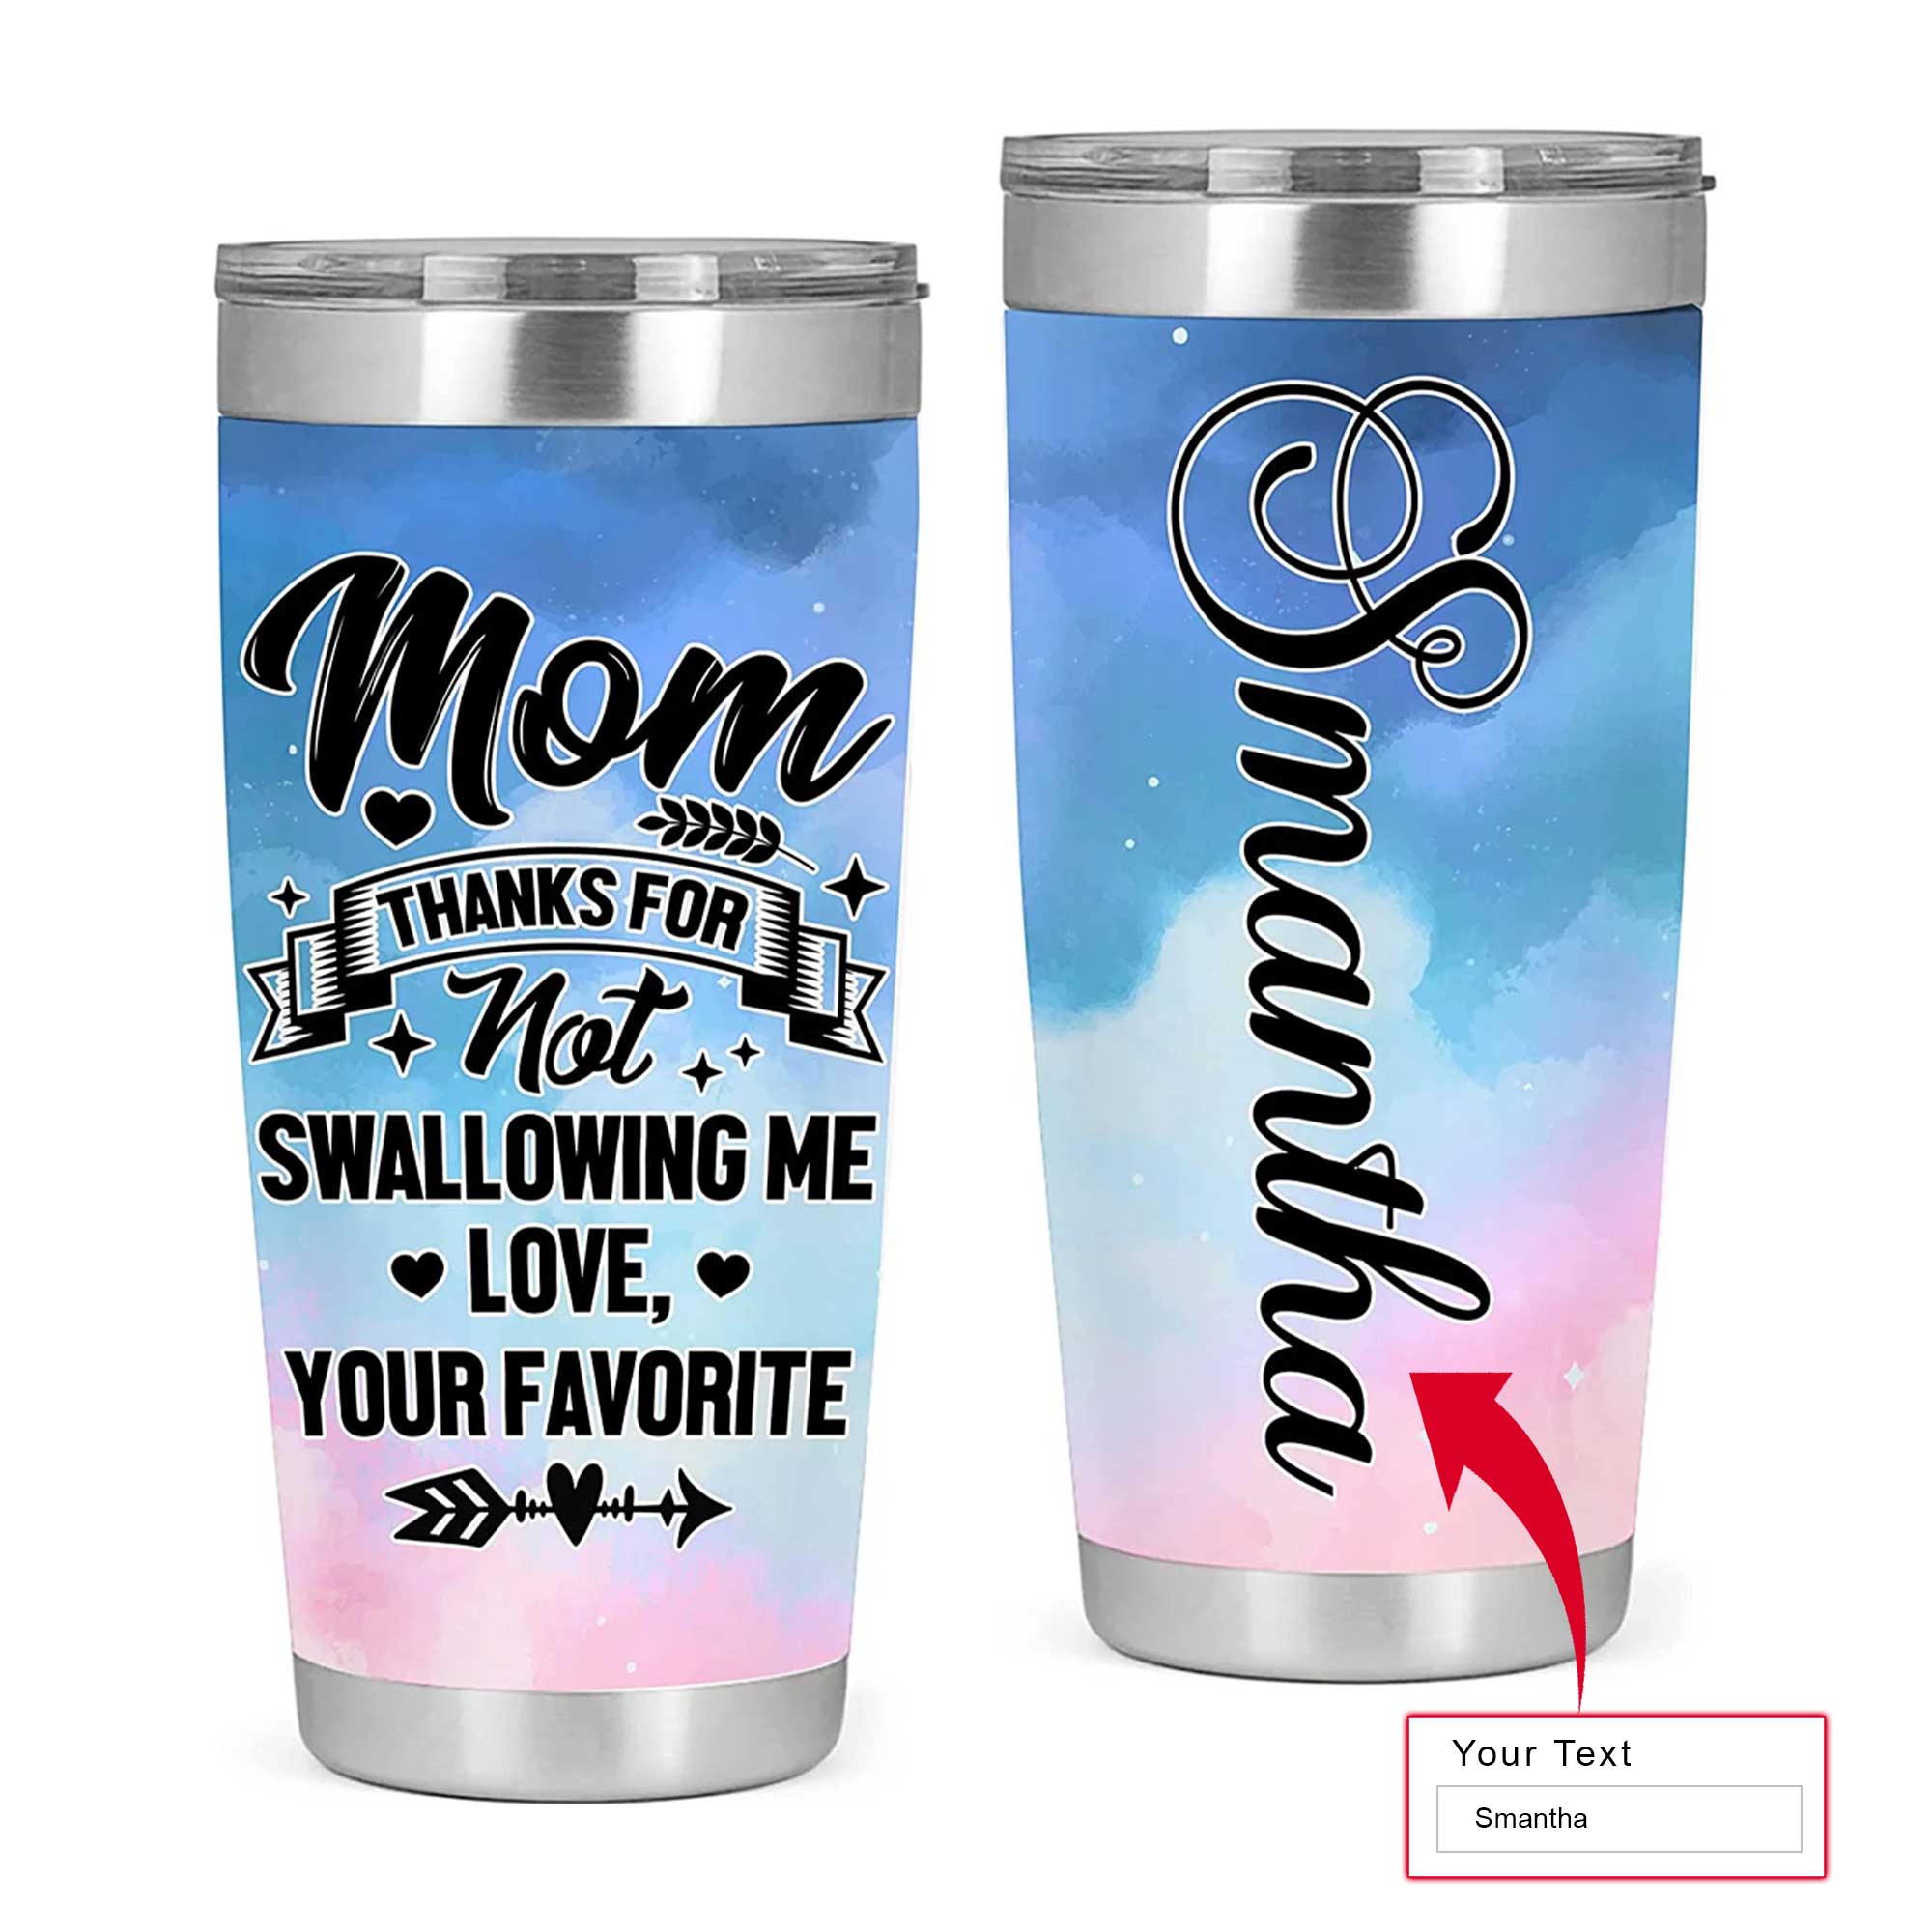 Personalized Mother's Day Gift Tumbler - Custom Gift For Mother's Day, Presents for Mom - Mom Thanks For Not Swallowing Me Love Your Favorite Tumbler